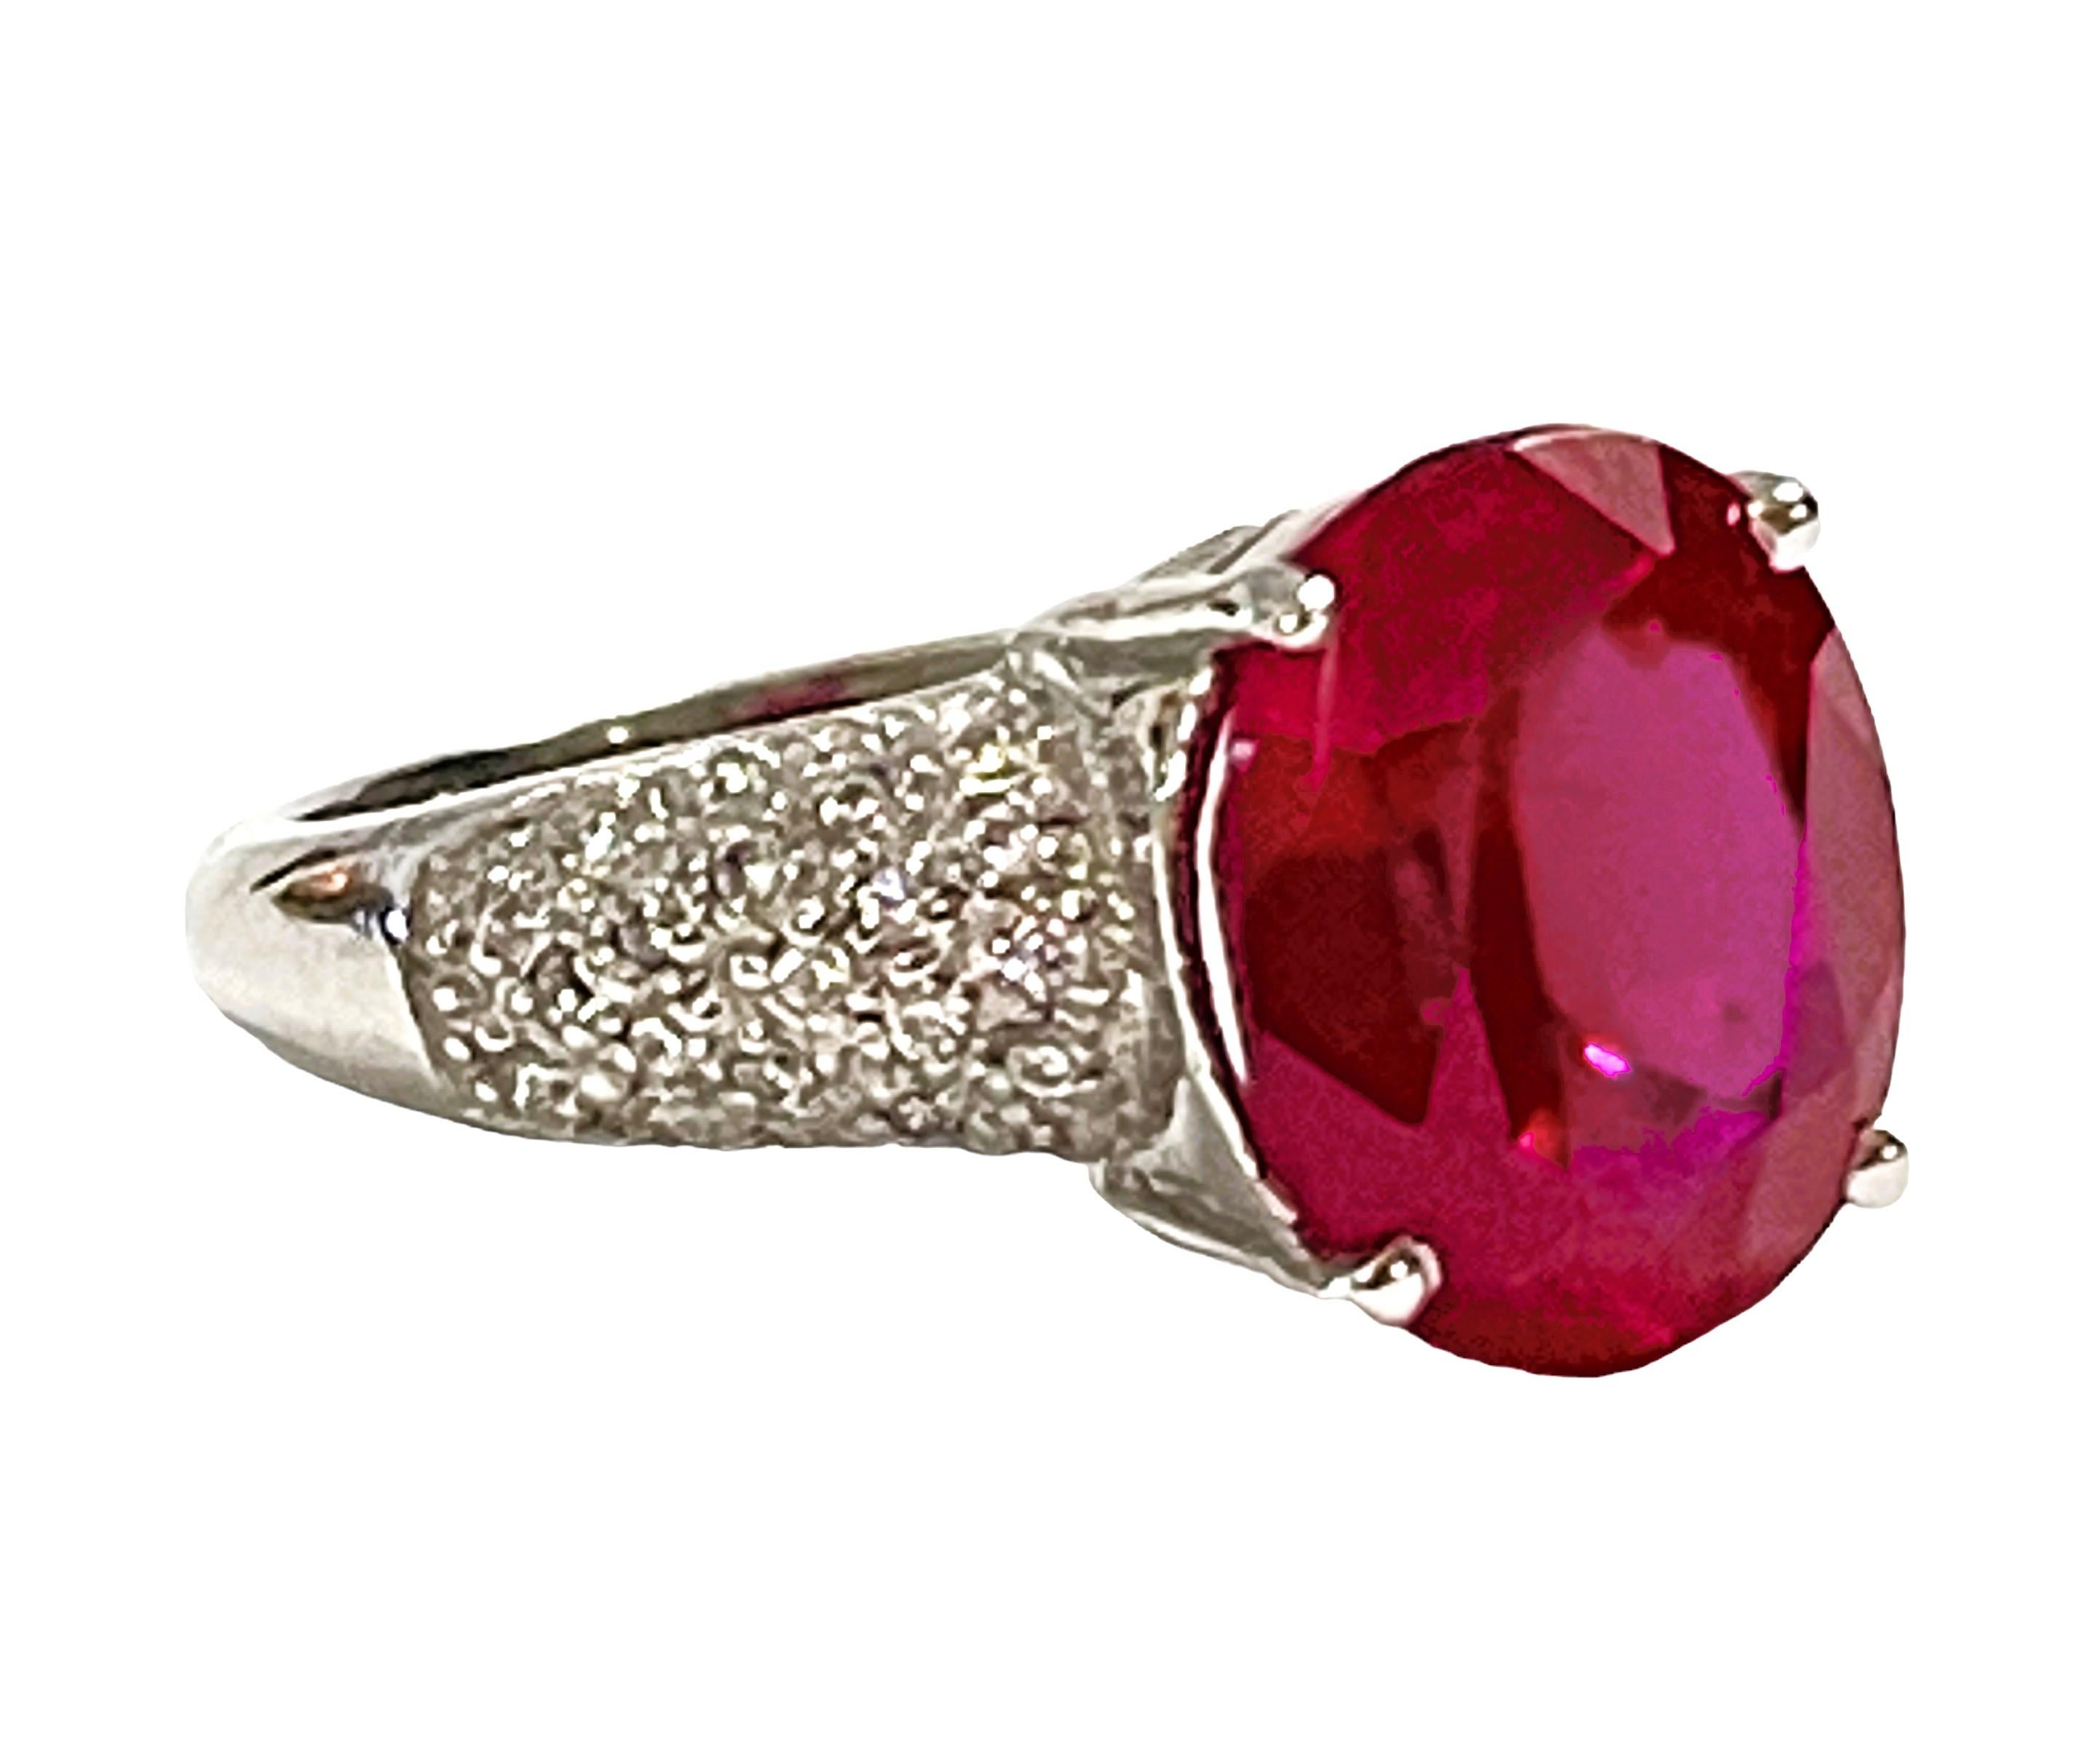 Women's New Madagascar 5.2ct Pinkish Red Sapphire & White Sapphire Sterling Ring